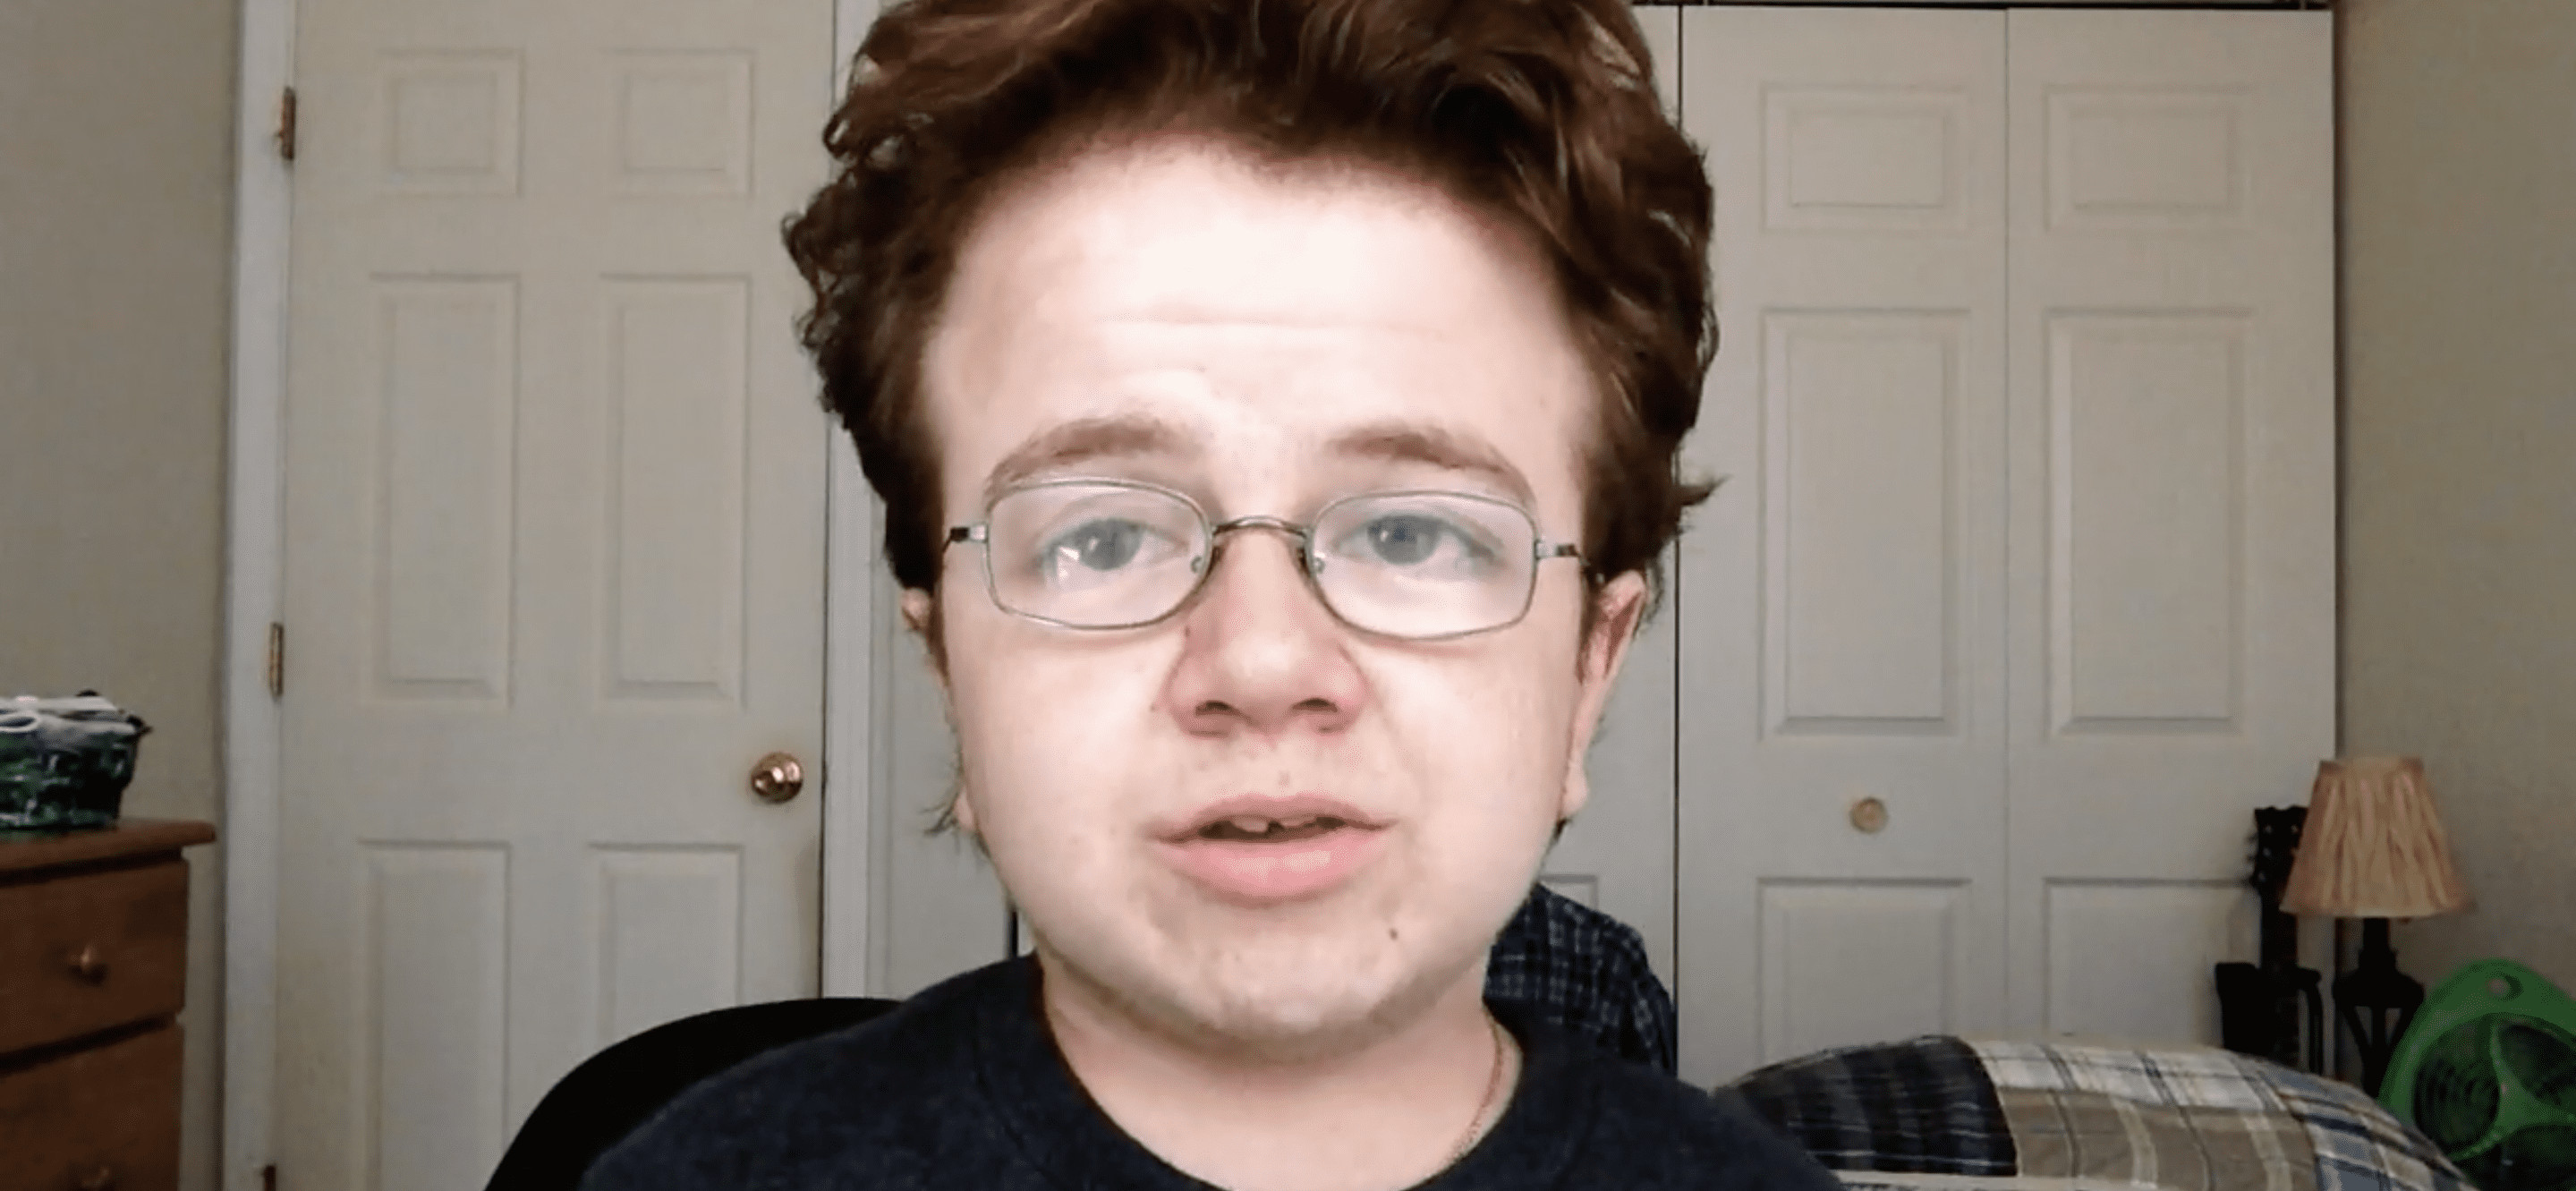 Keenan Cahill in his room while making videos 